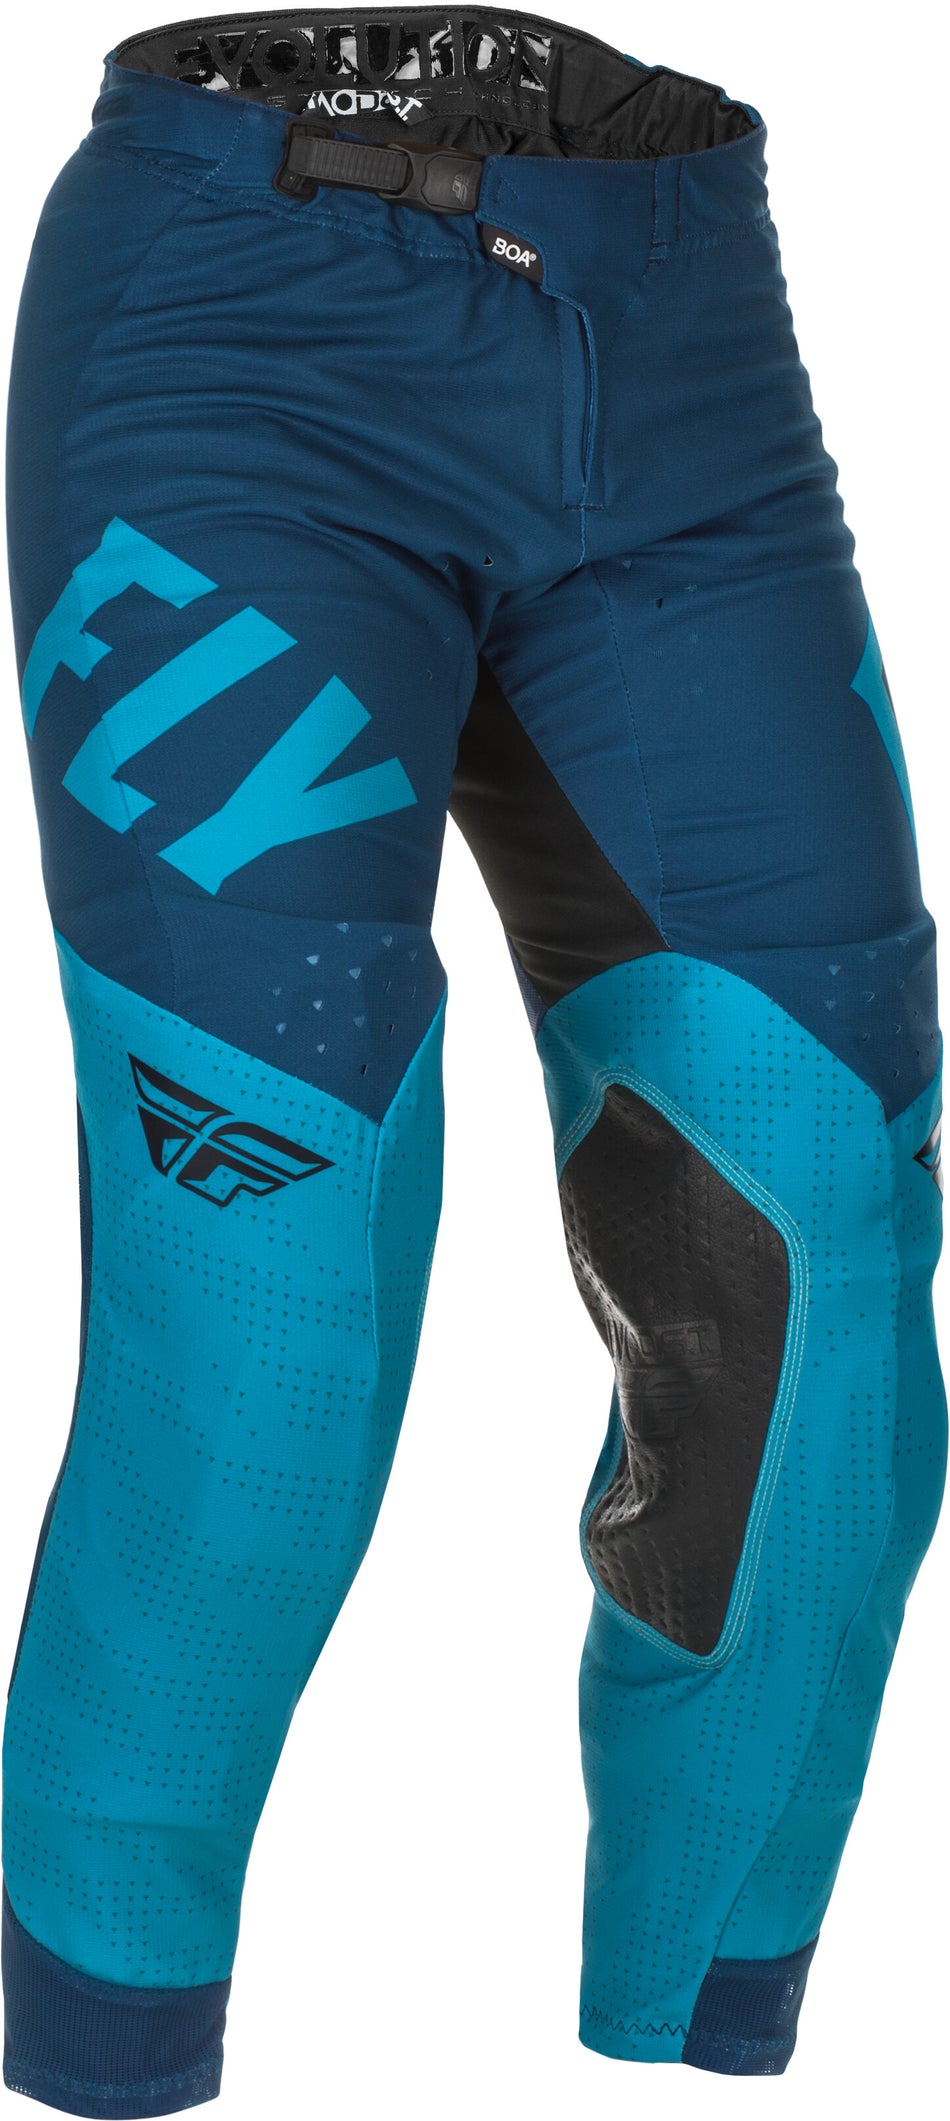 FLY RACING Evolution Dst Pants Blue/Navy Sz 28 374-13128